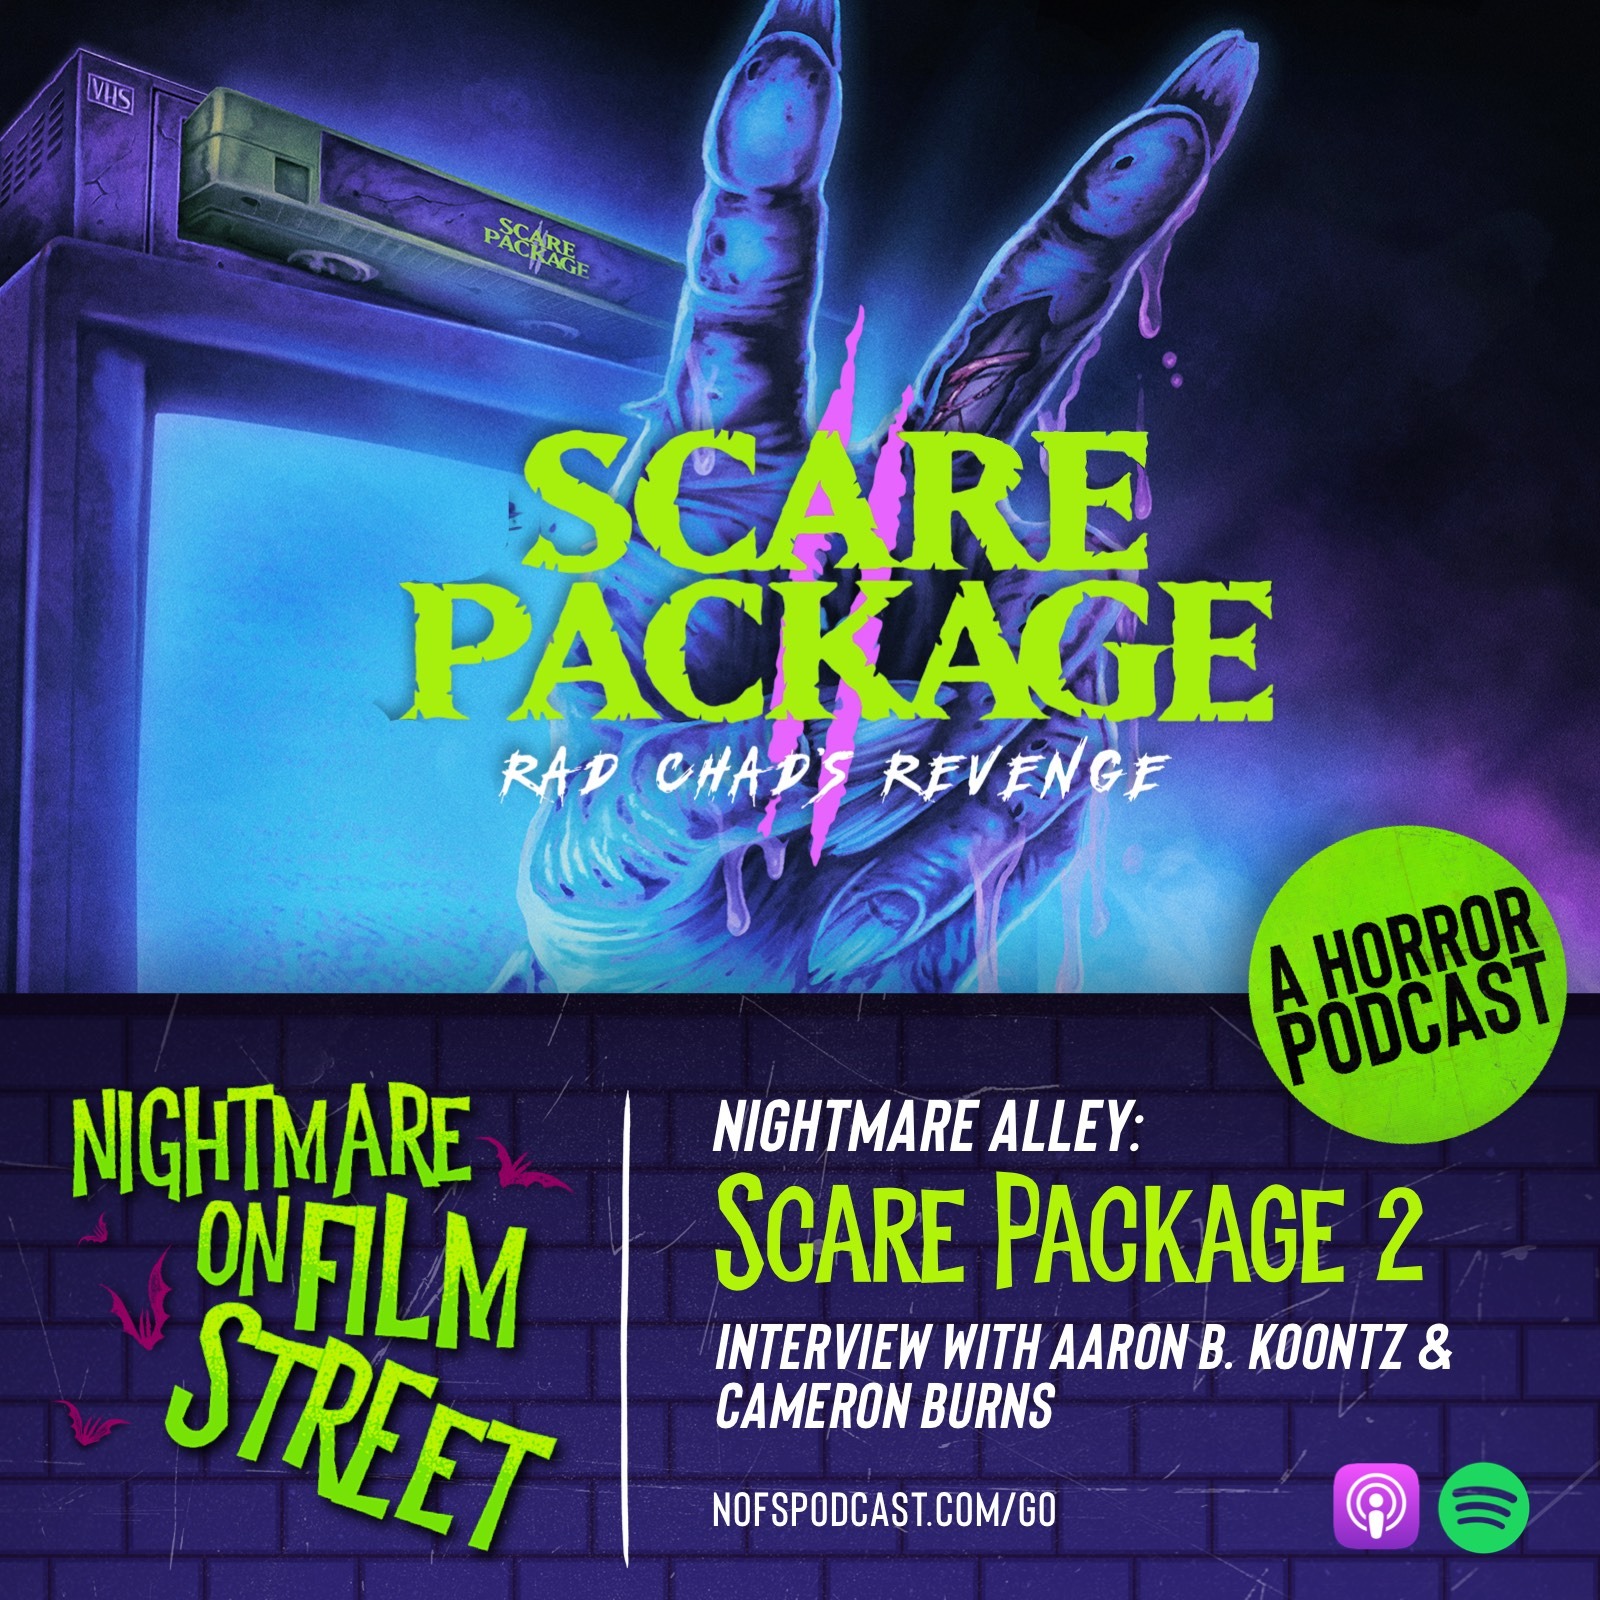 [Nightmare Alley] Chatting Chads with SCARE PACKAGE II: RAD CHAD'S REVENGE Filmmakers Aaron B. Koontz and Cameron Burns